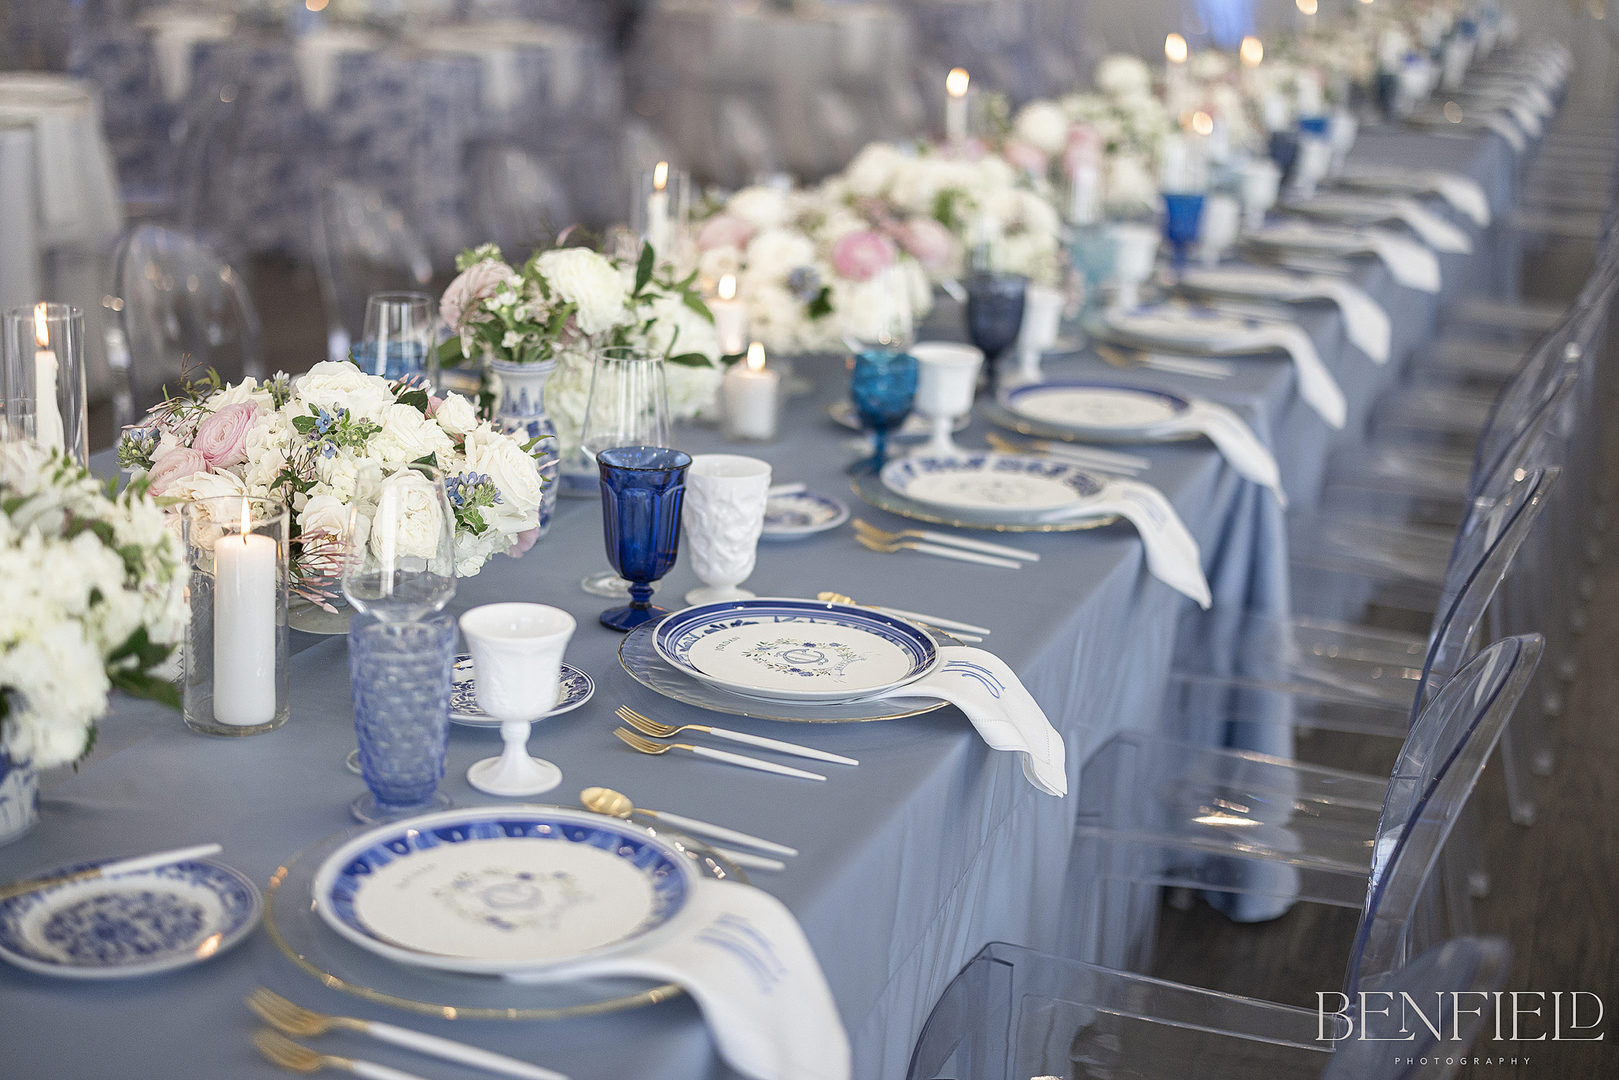 luxury wedding photography with blue and white wedding details of a high end reception